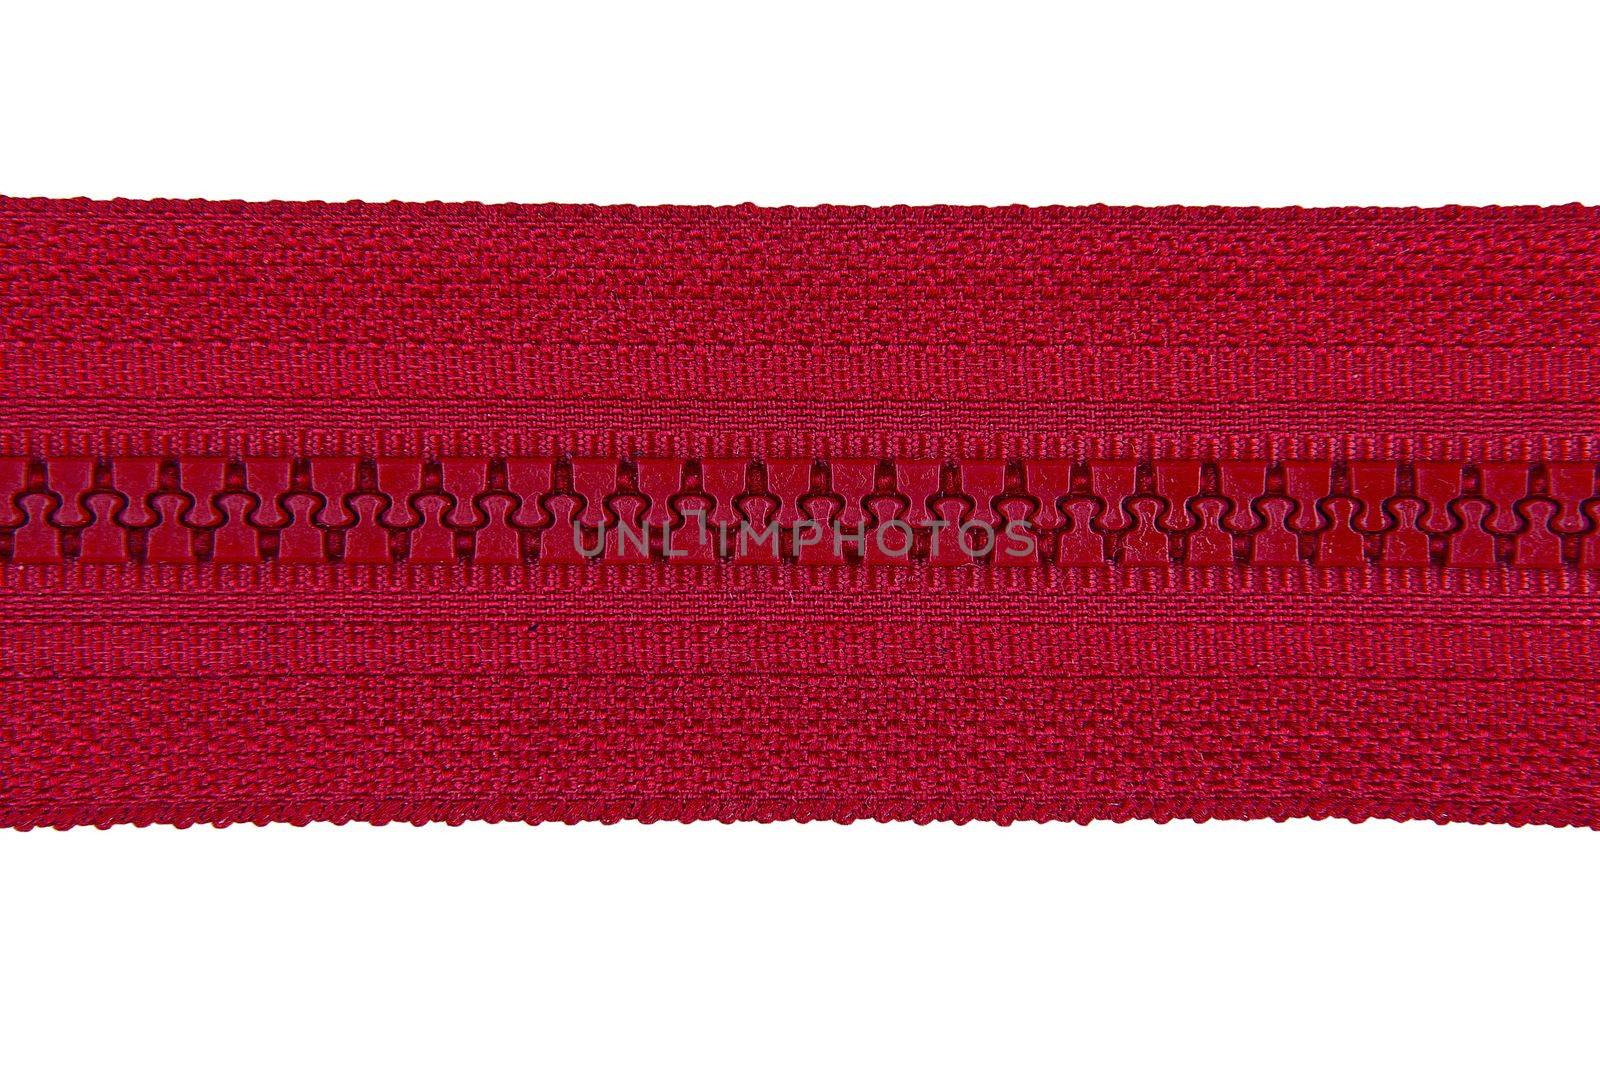 Closed red zipper isolated on white background. Red zipper for tailor sewing. View from above